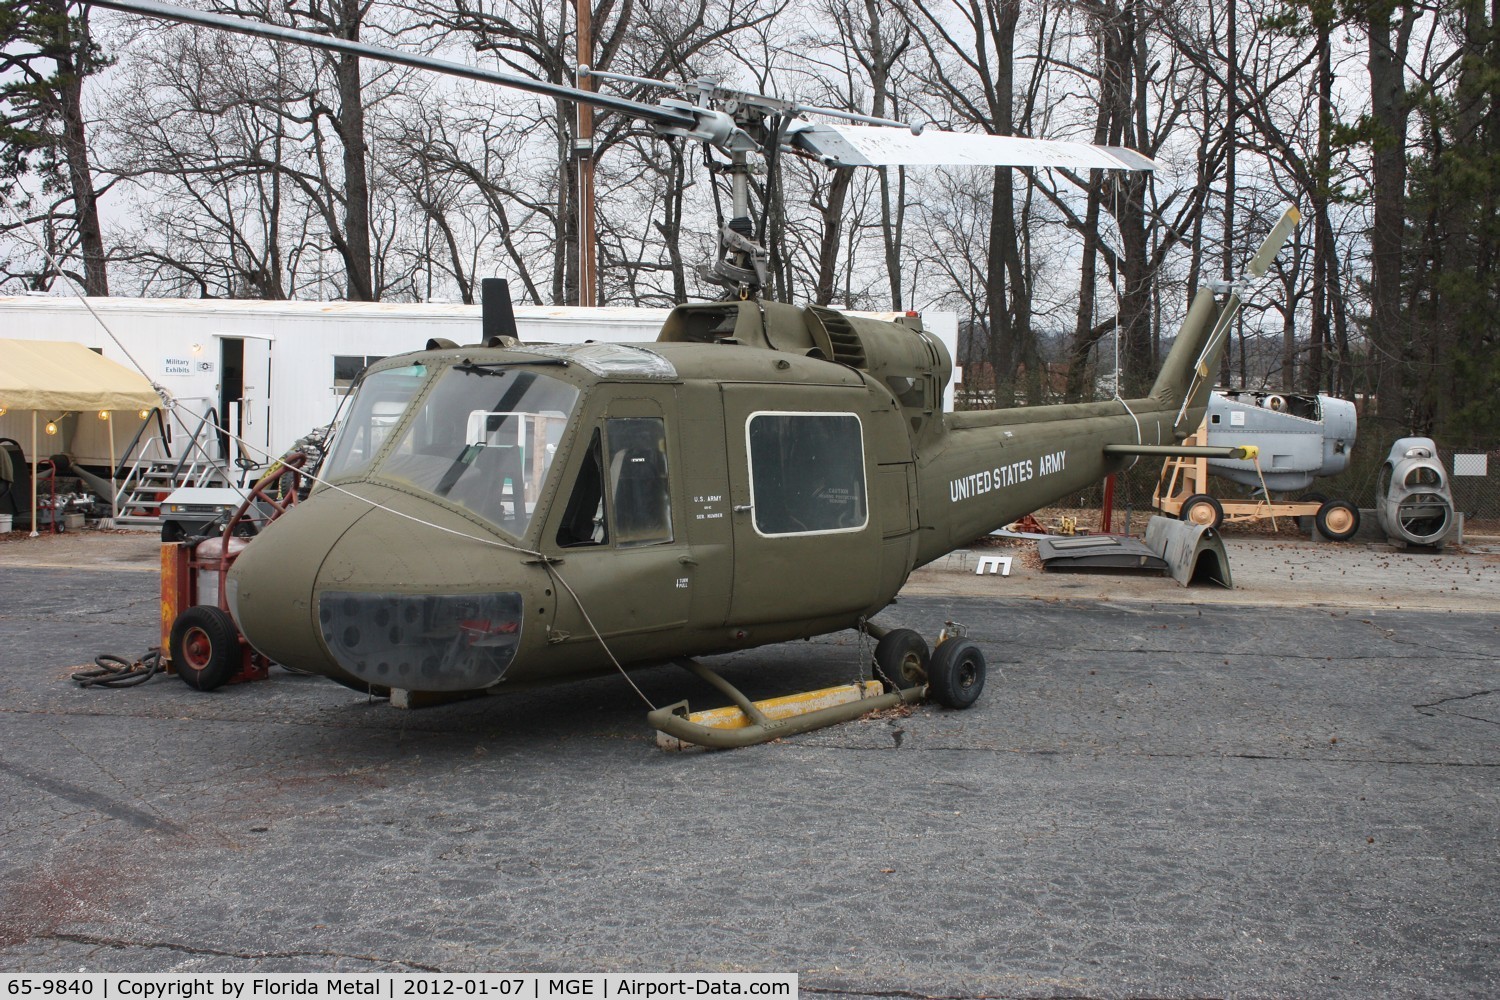 65-9840, 1965 Bell UH-1D Iroquois C/N 4884, UH-1 at Dobbins museum